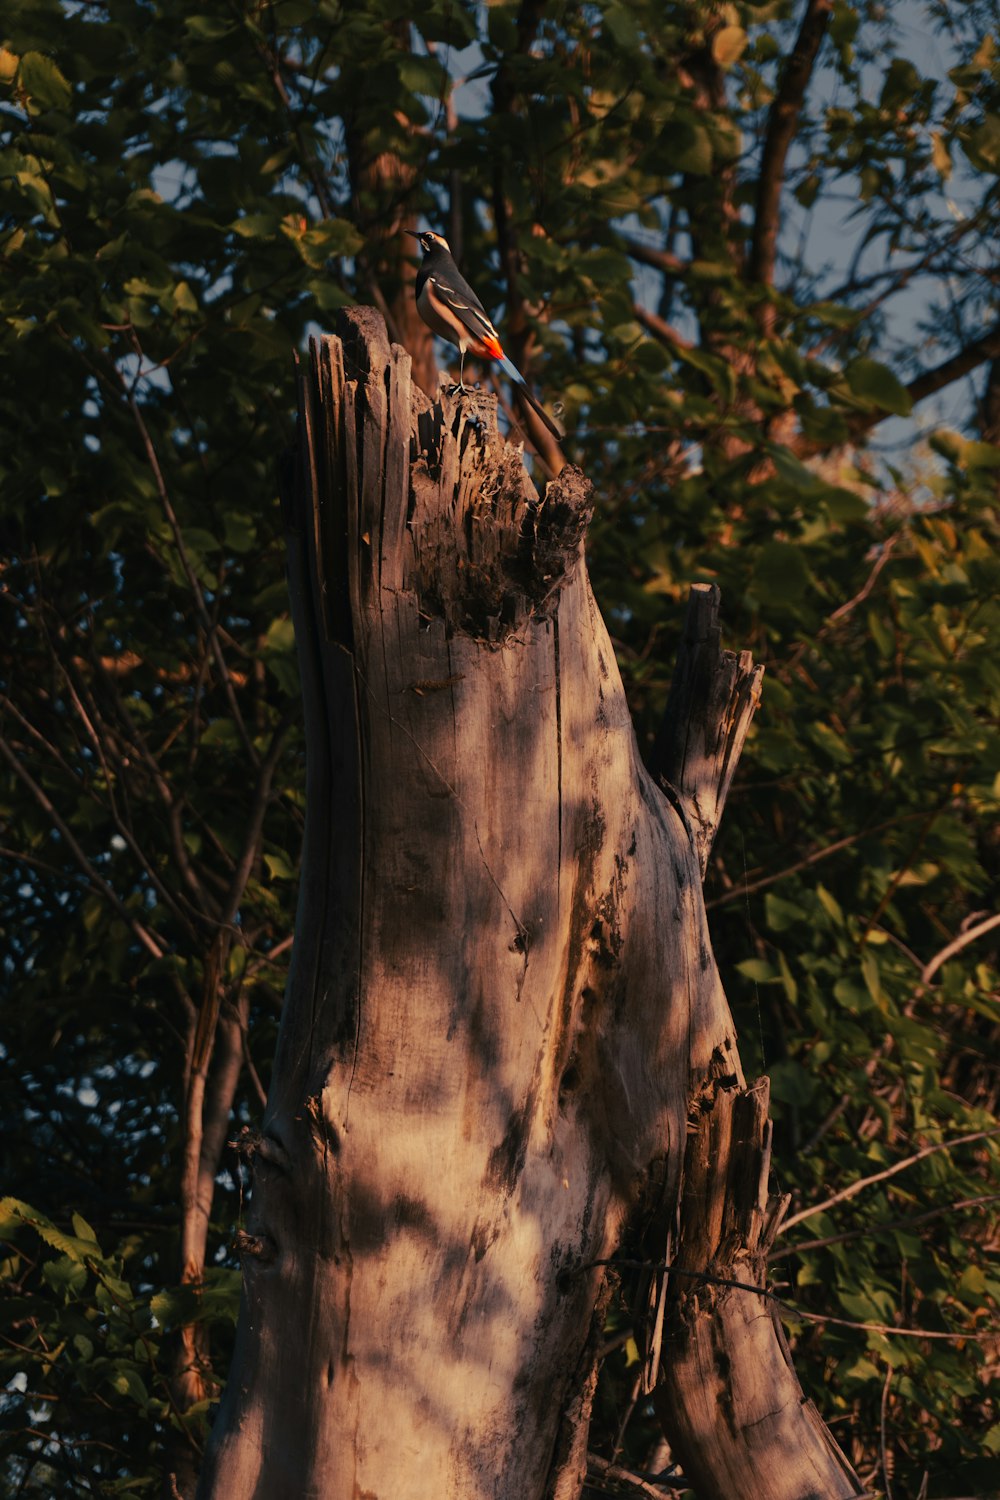 a bird perched on top of a tree stump